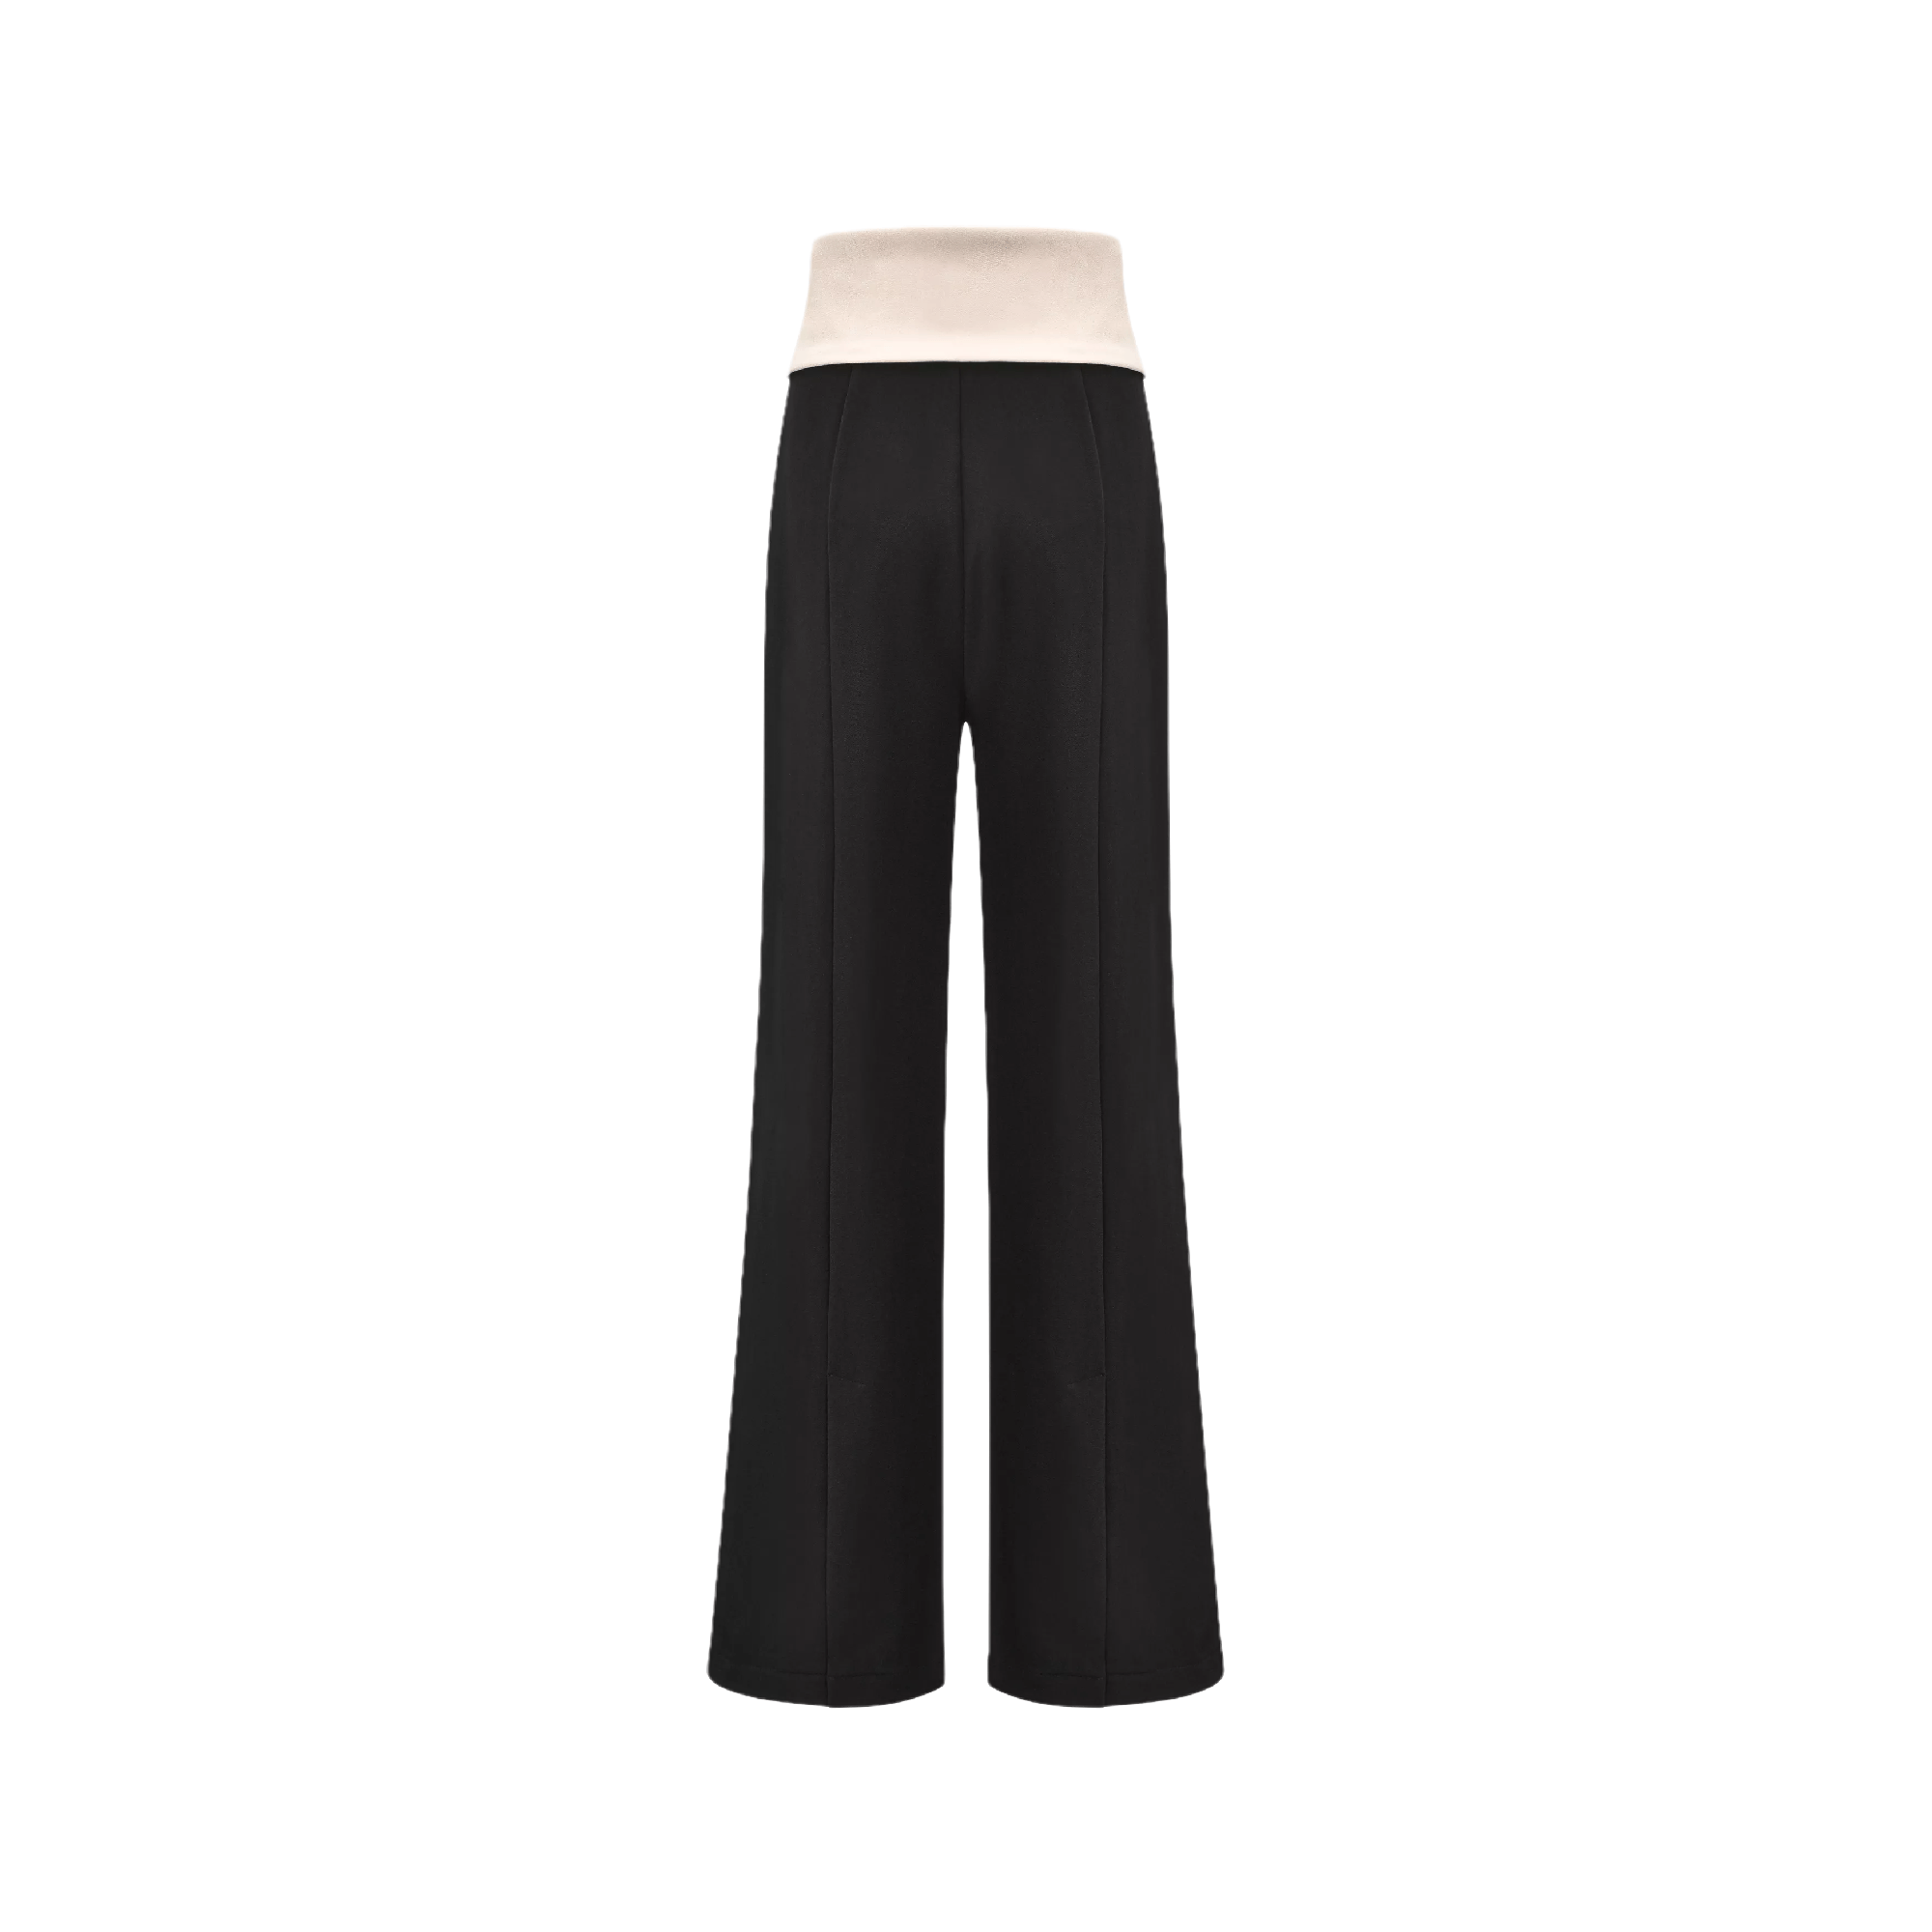 Savage-inside-out contrast-color trousers - itsy, it‘s different